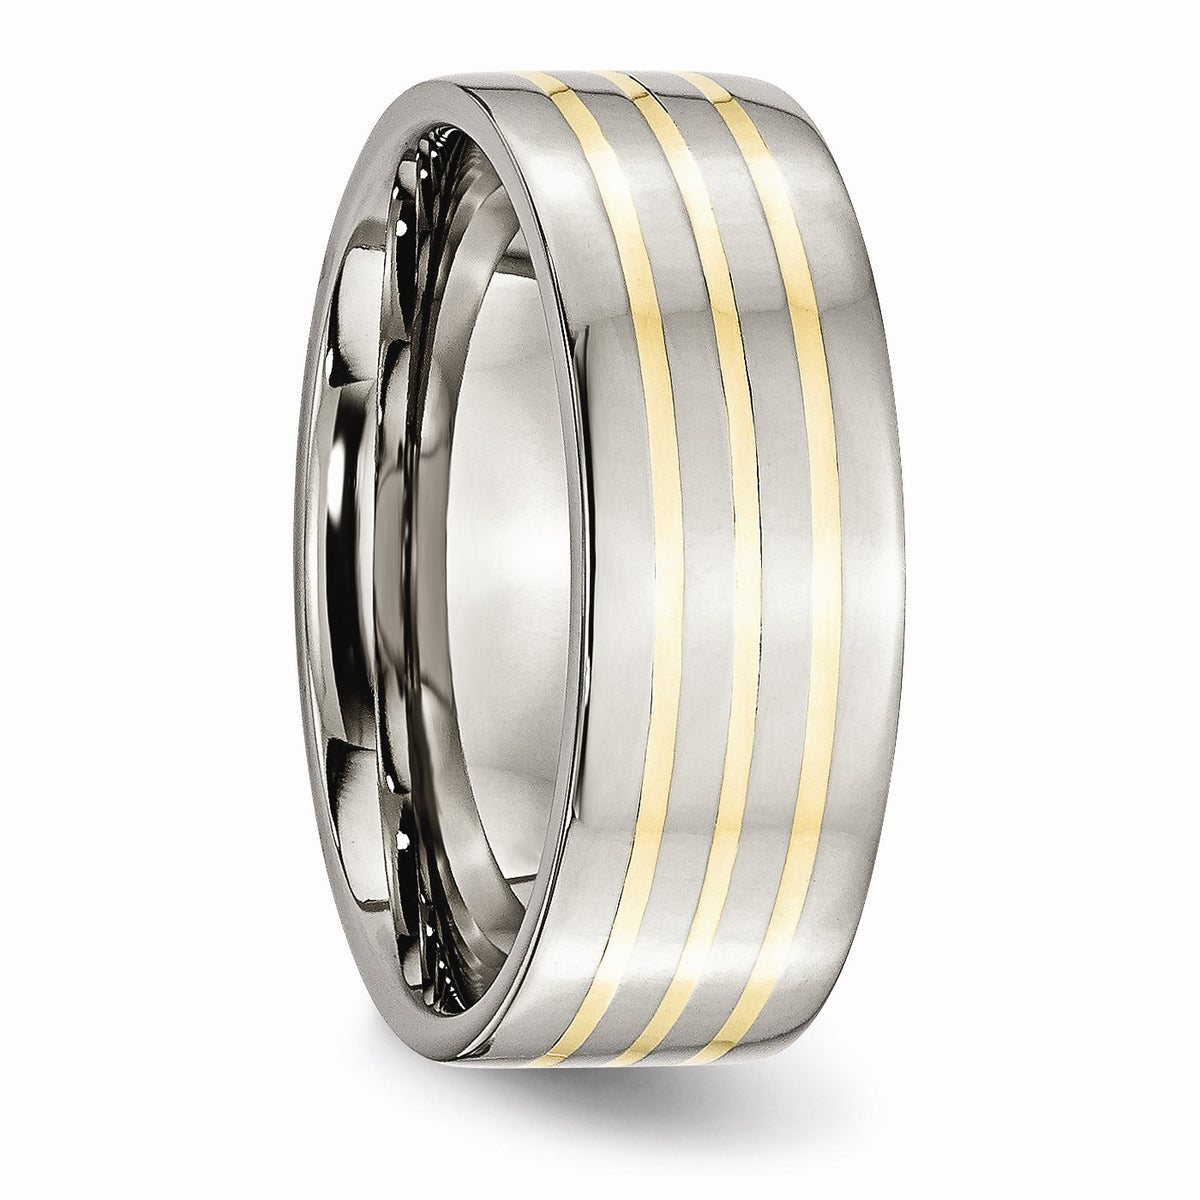 Alternate view of the Titanium and 14K Gold, 8mm Flat Unisex Comfort Fit Band by The Black Bow Jewelry Co.